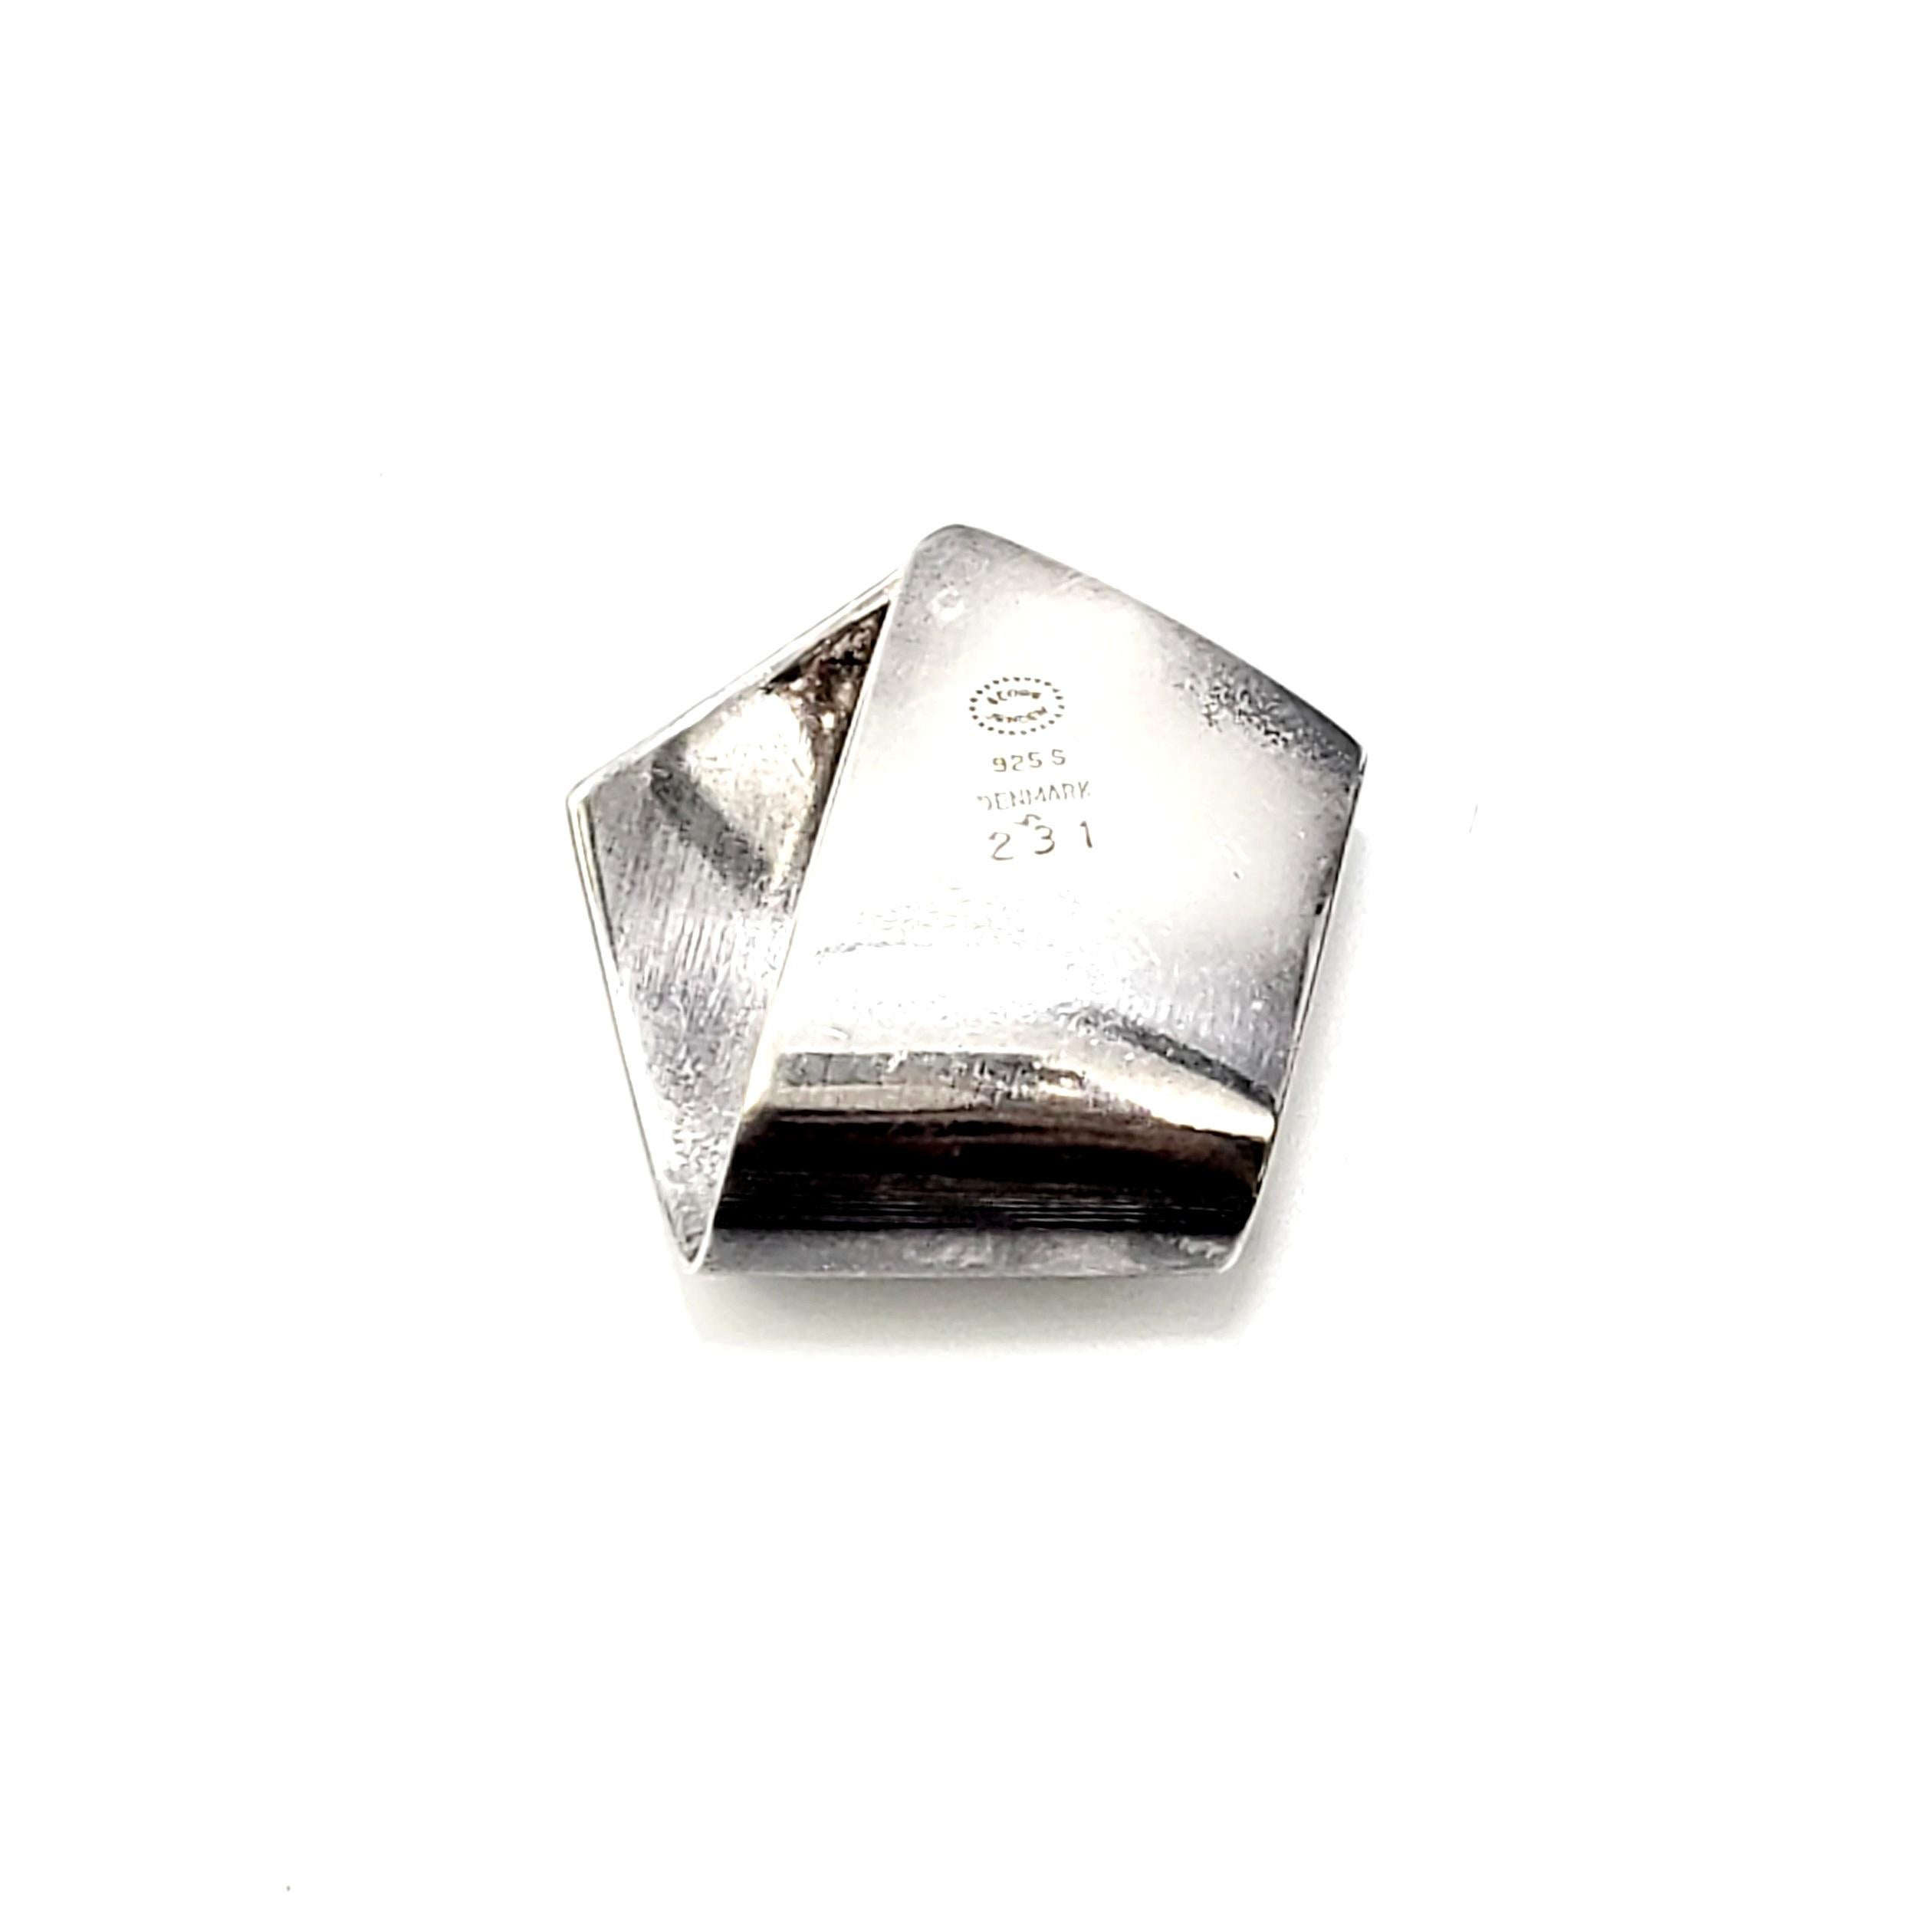 Georg Jensen sterling silver pendant, pattern #231.

This modernist piece features a folded design.

Measures 1 1/8